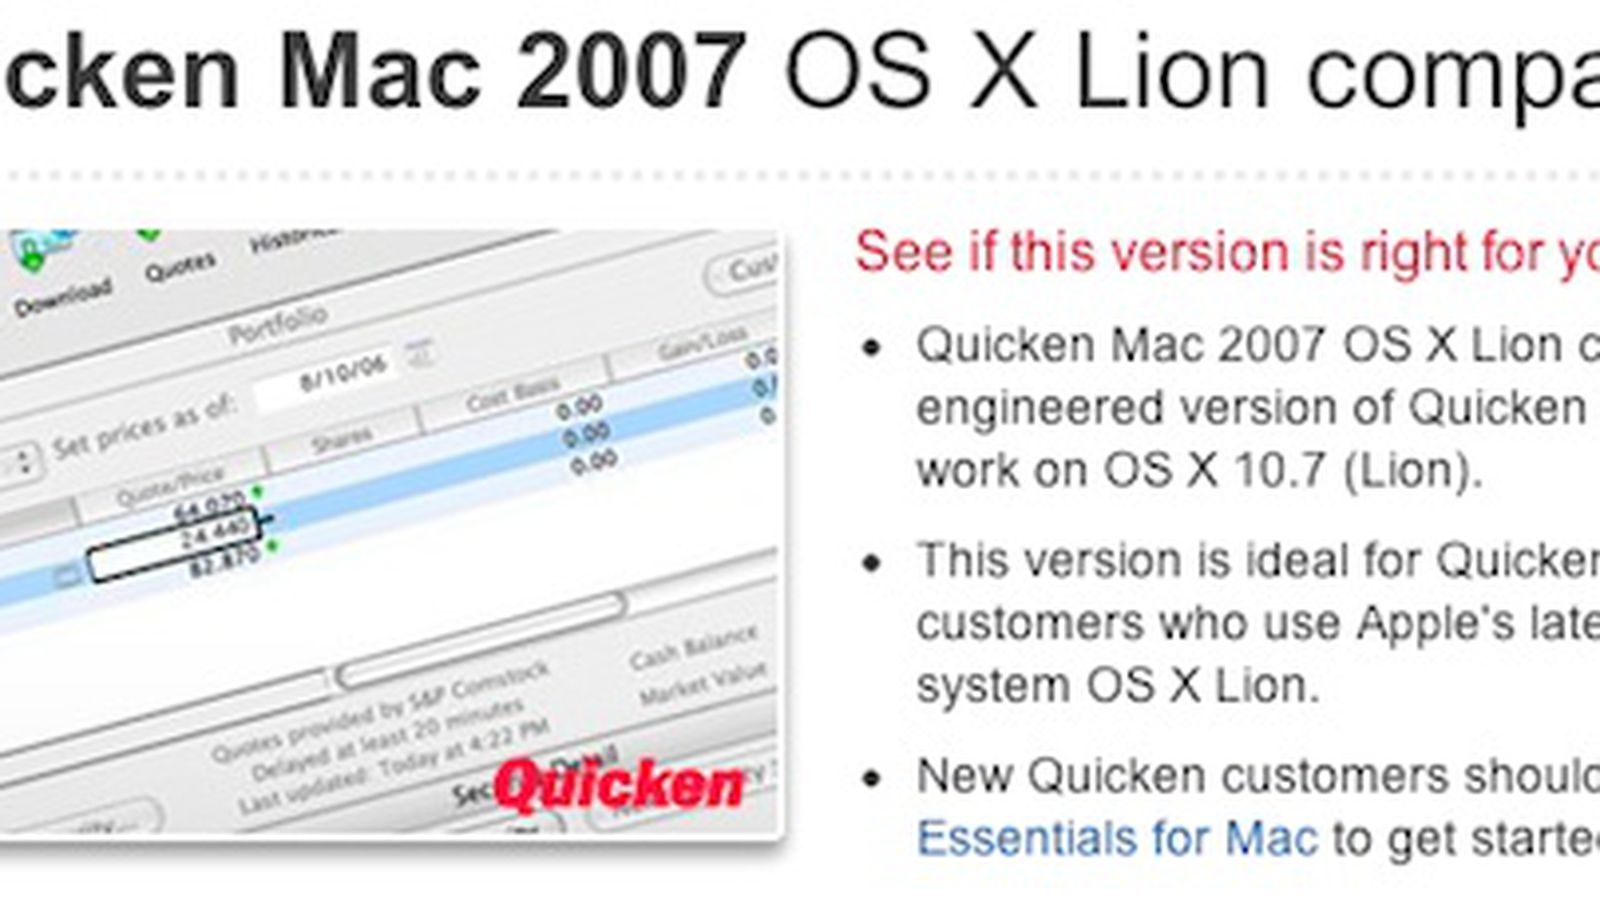 can you still get quotes for quicken for mac 2007